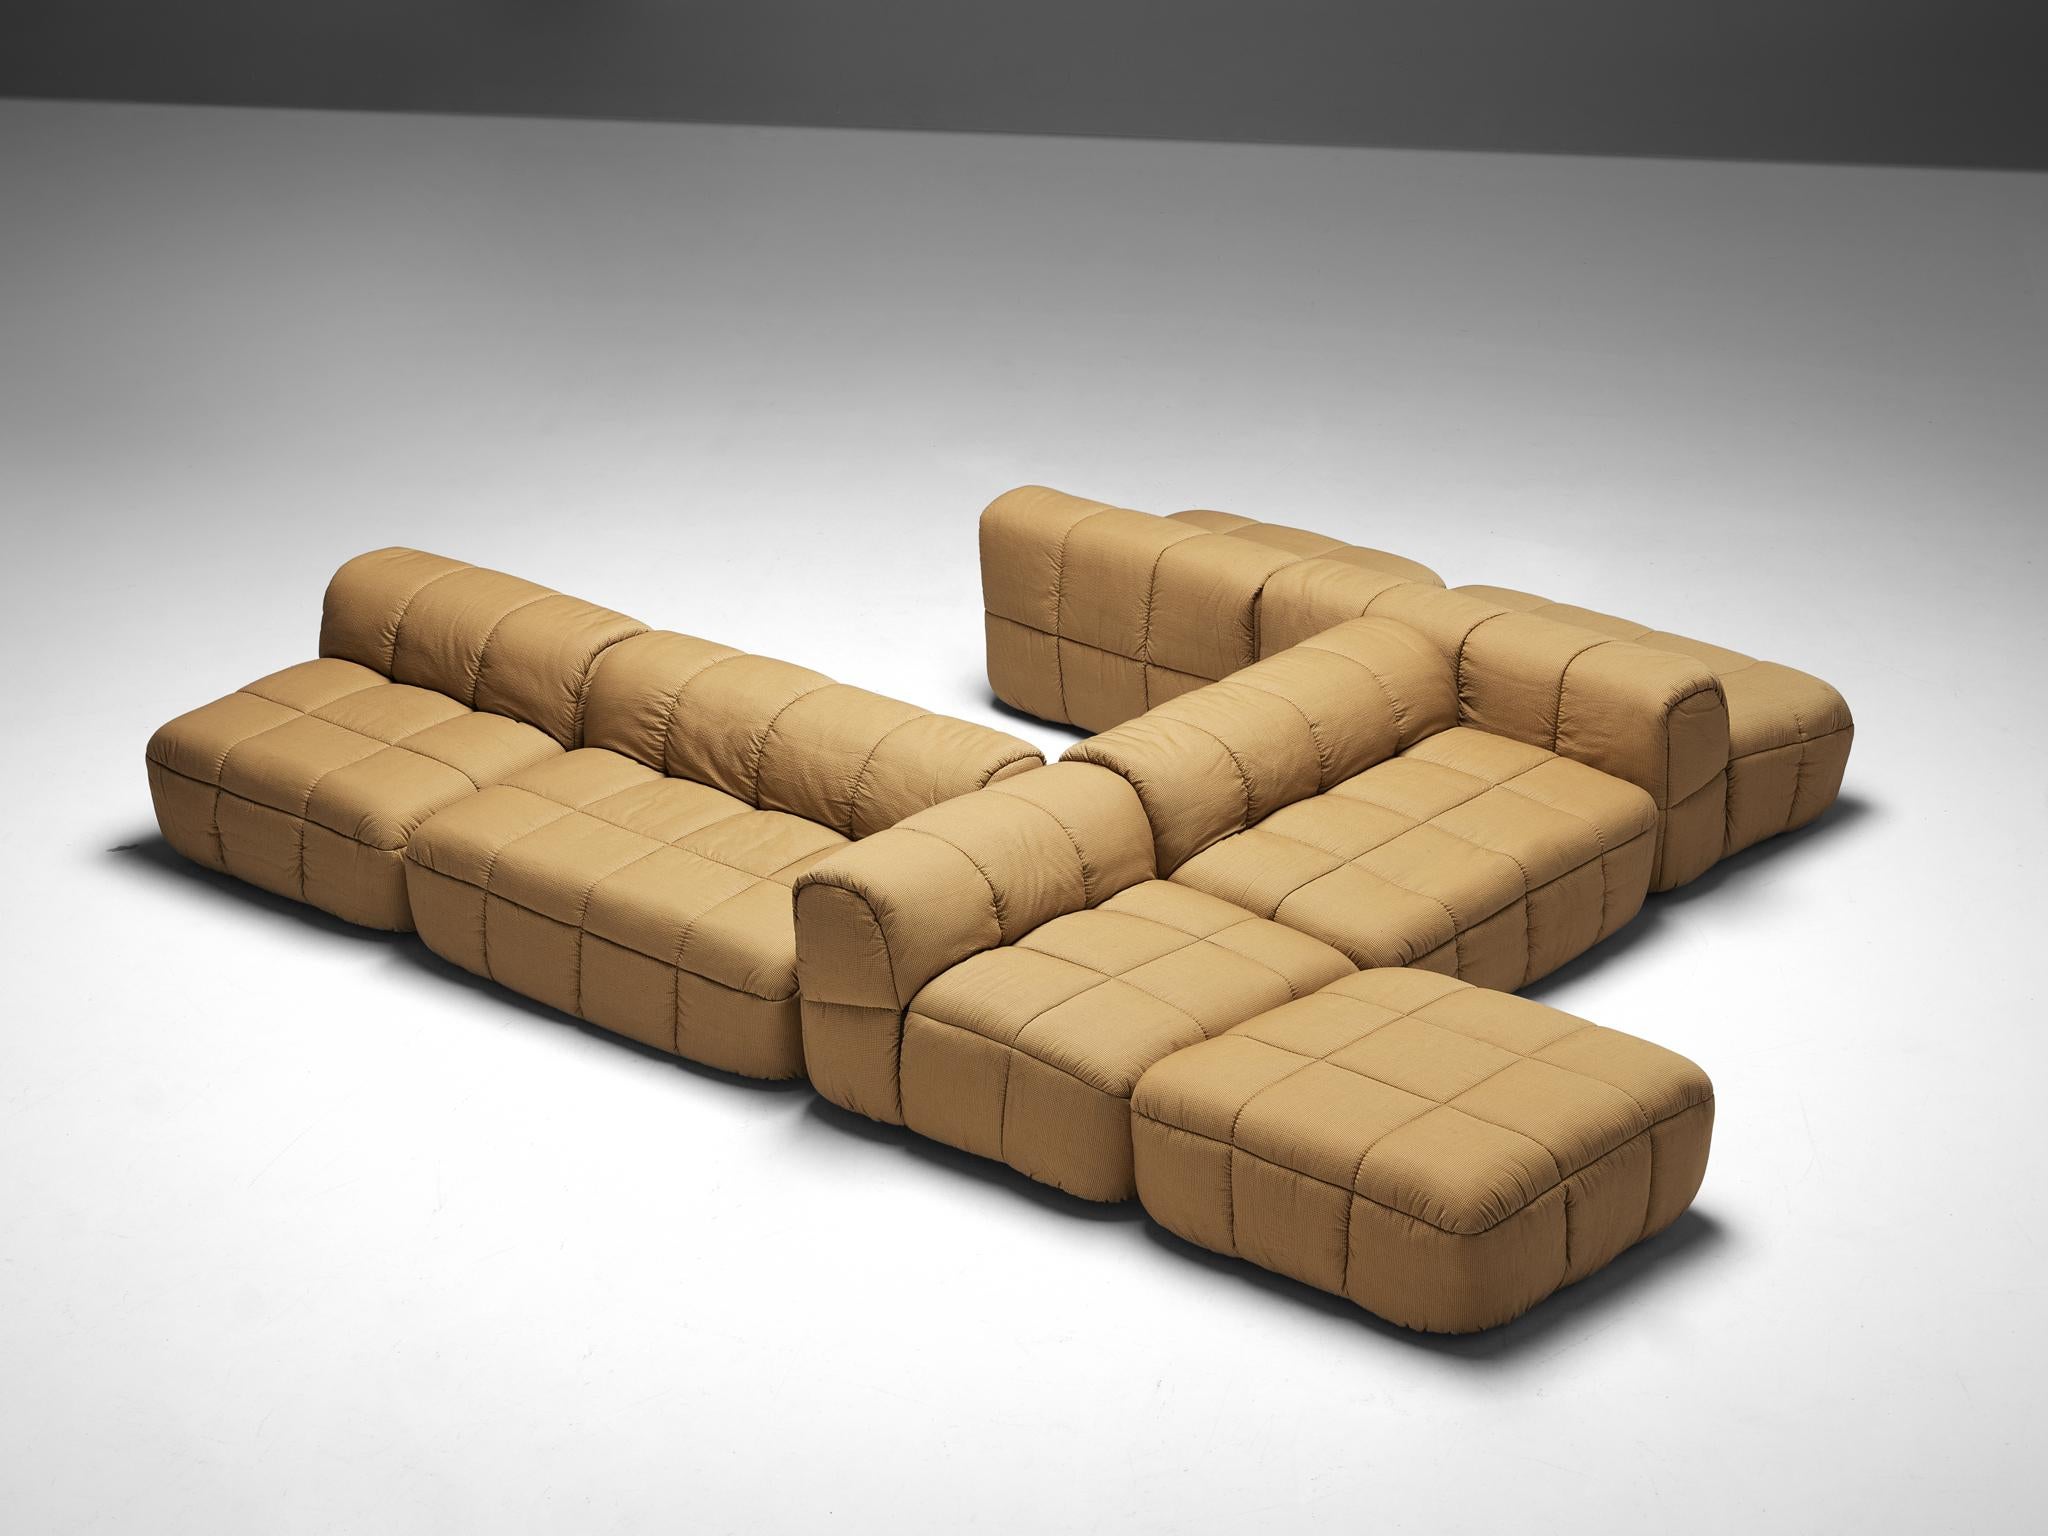 Cini Boeri for Arflex, modular 'strips' sofa, upholstery, Italy, 1970s

Stunning 'Strips' sofa designed by Cini Boeri for Arflex. This set consists out of seven elements, of which six contain a backrest, that can be placed differently, making the